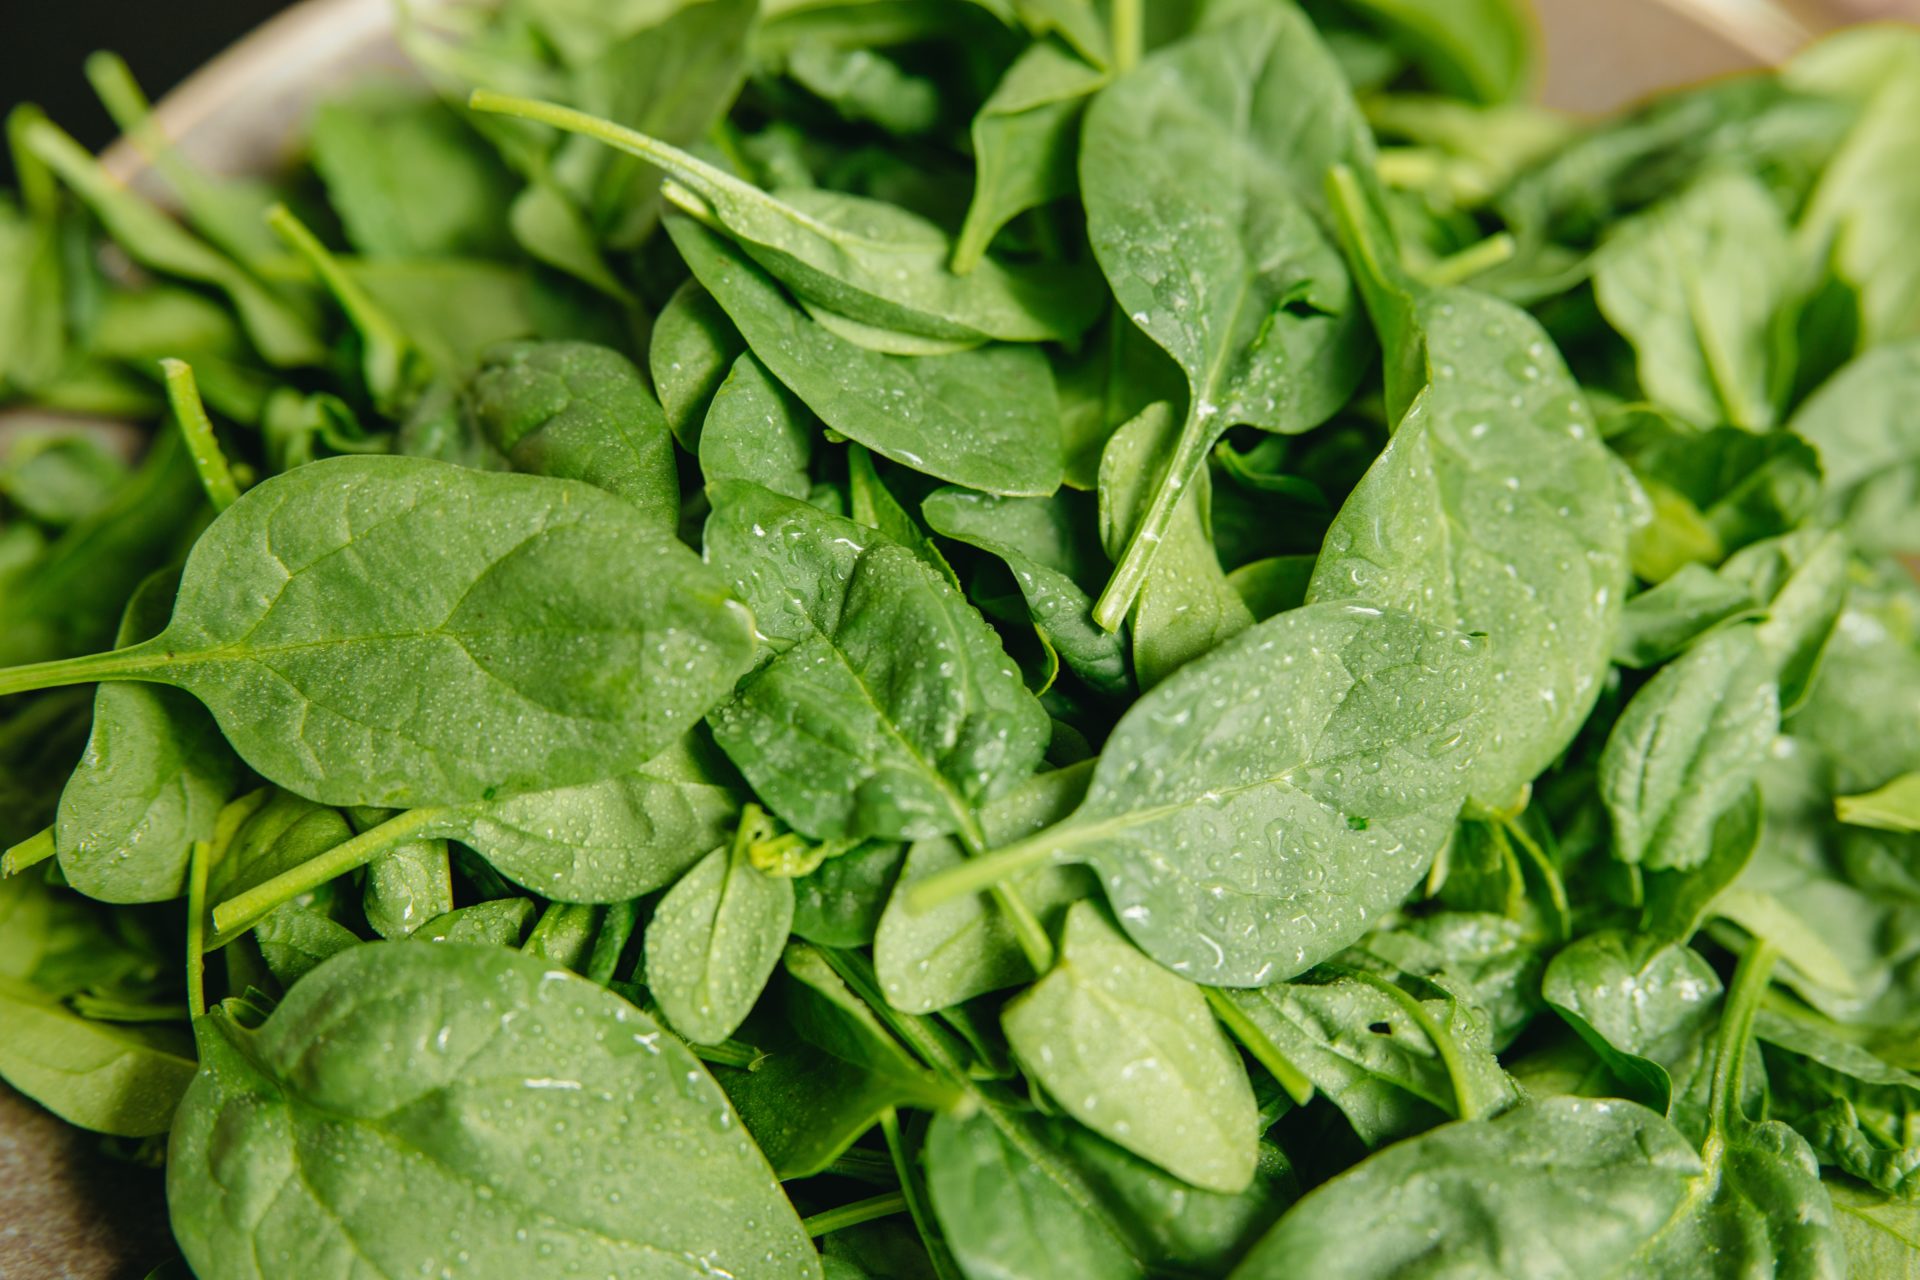 A close up of harvested spinach leaves.